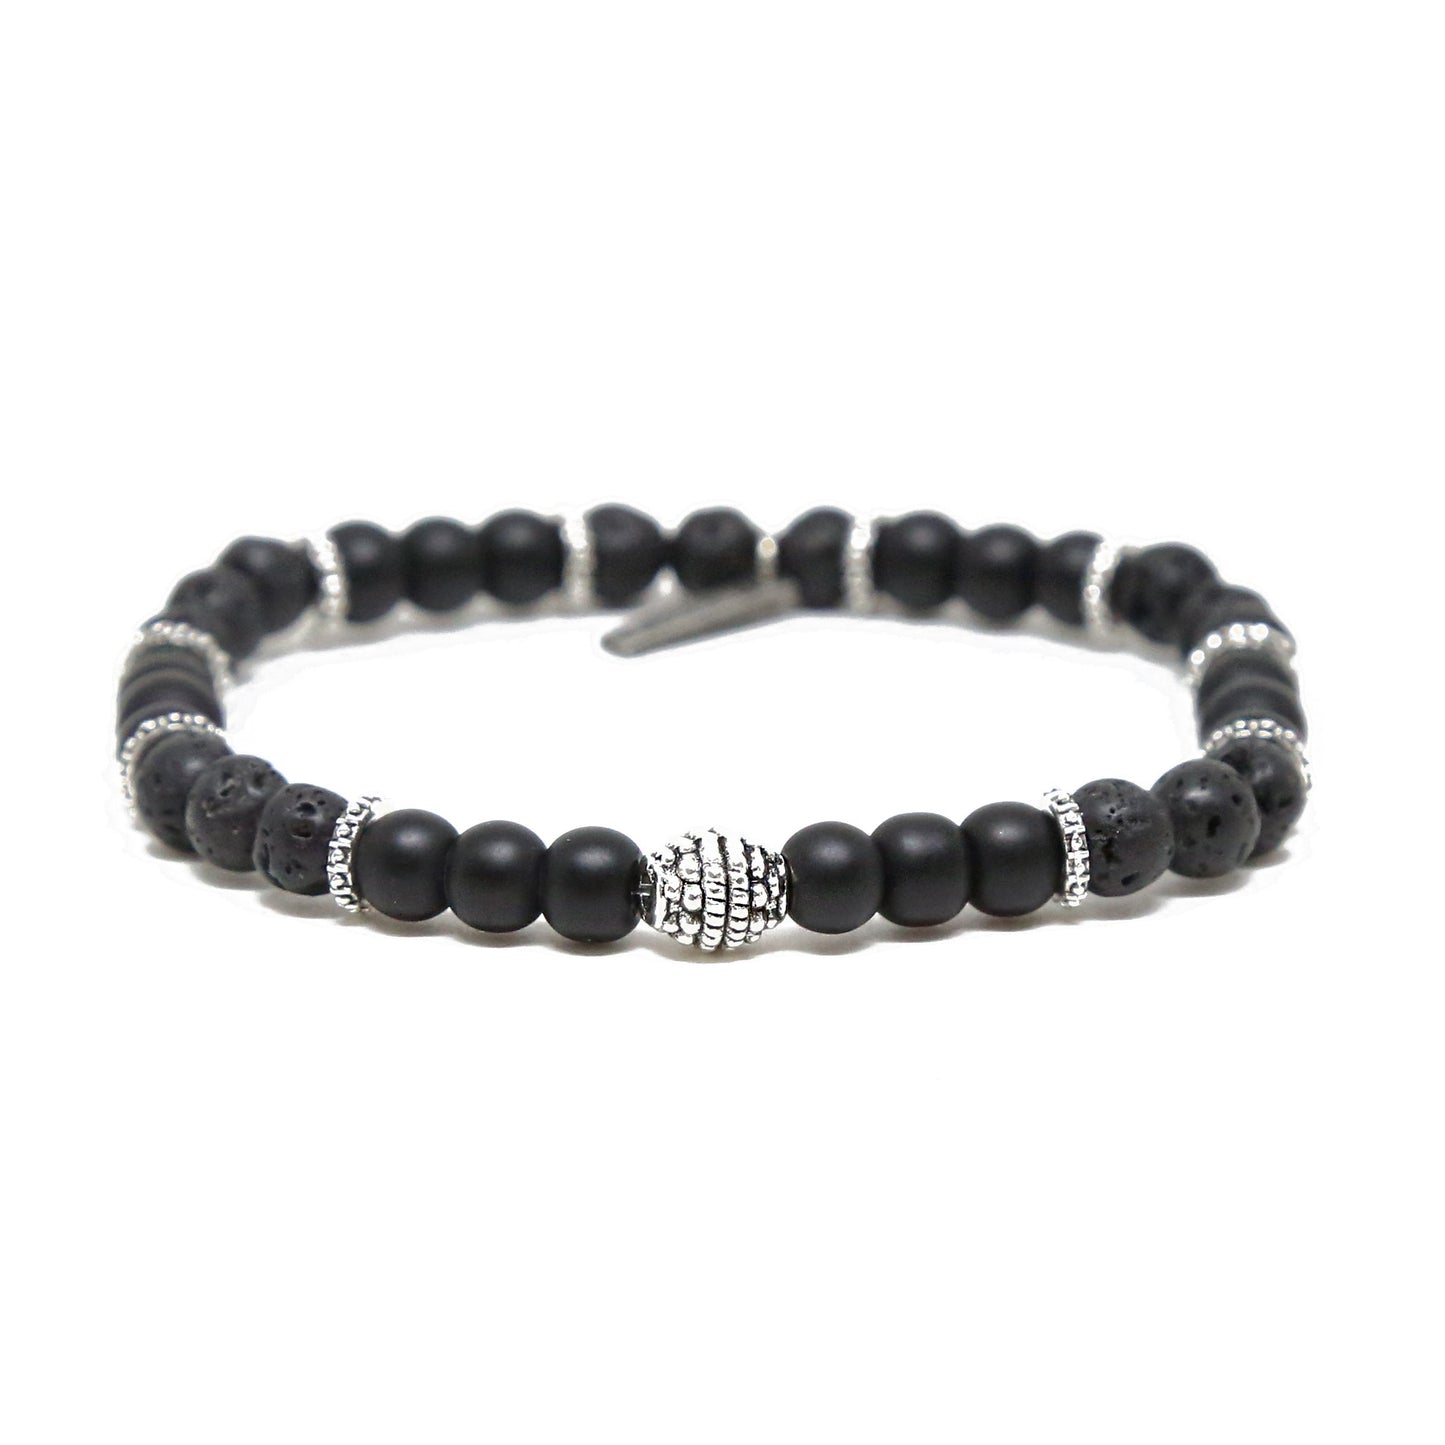 In the Mix Bracelet in Black Lava Bead and Silver Ox